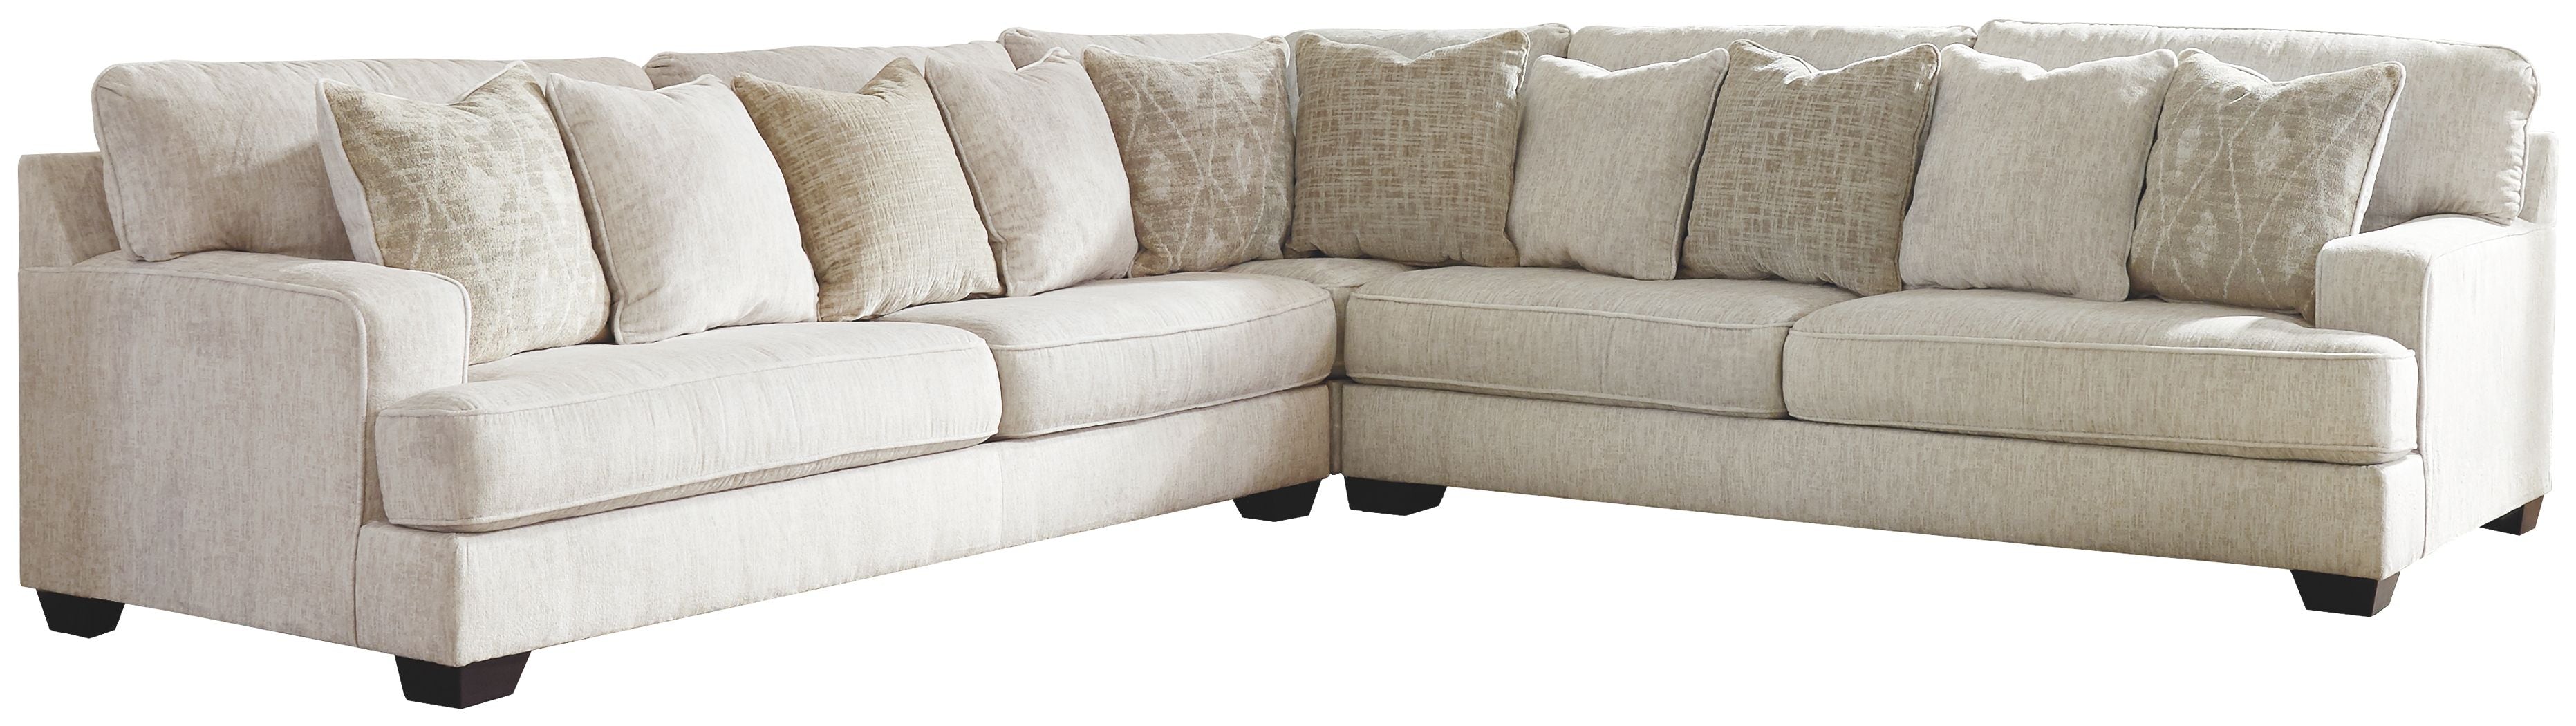 rawcliffe sectional